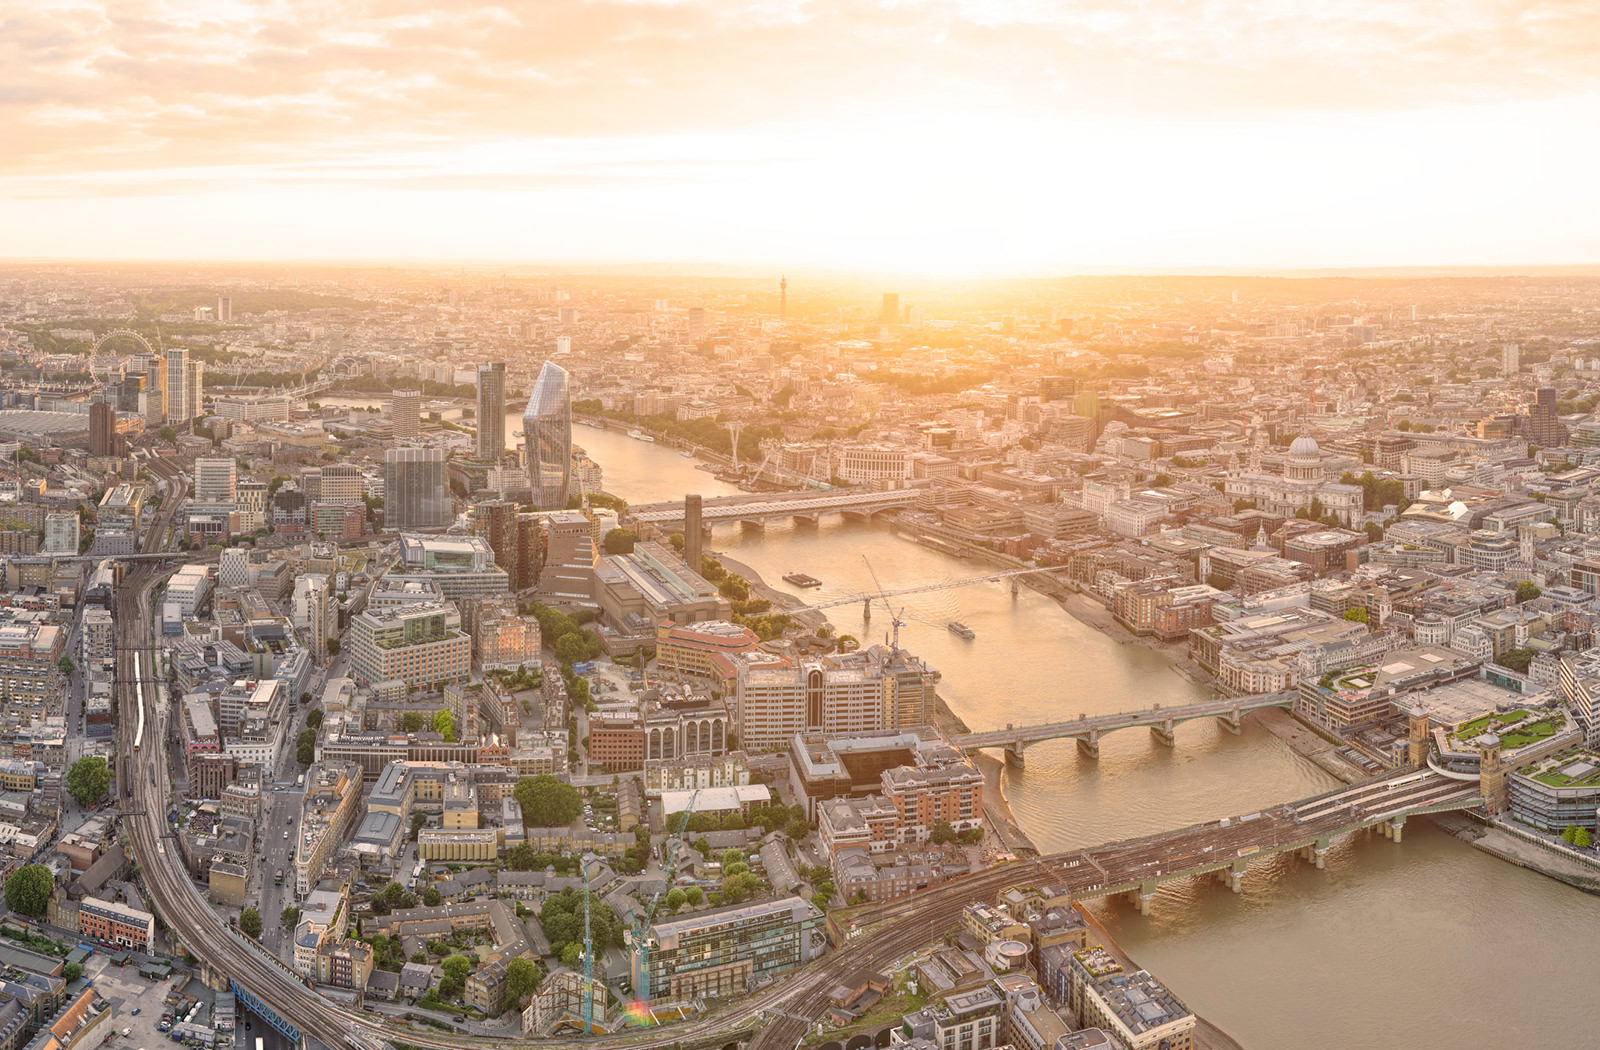 Roseate London: Hi-res London Skyline image by Will Pearson